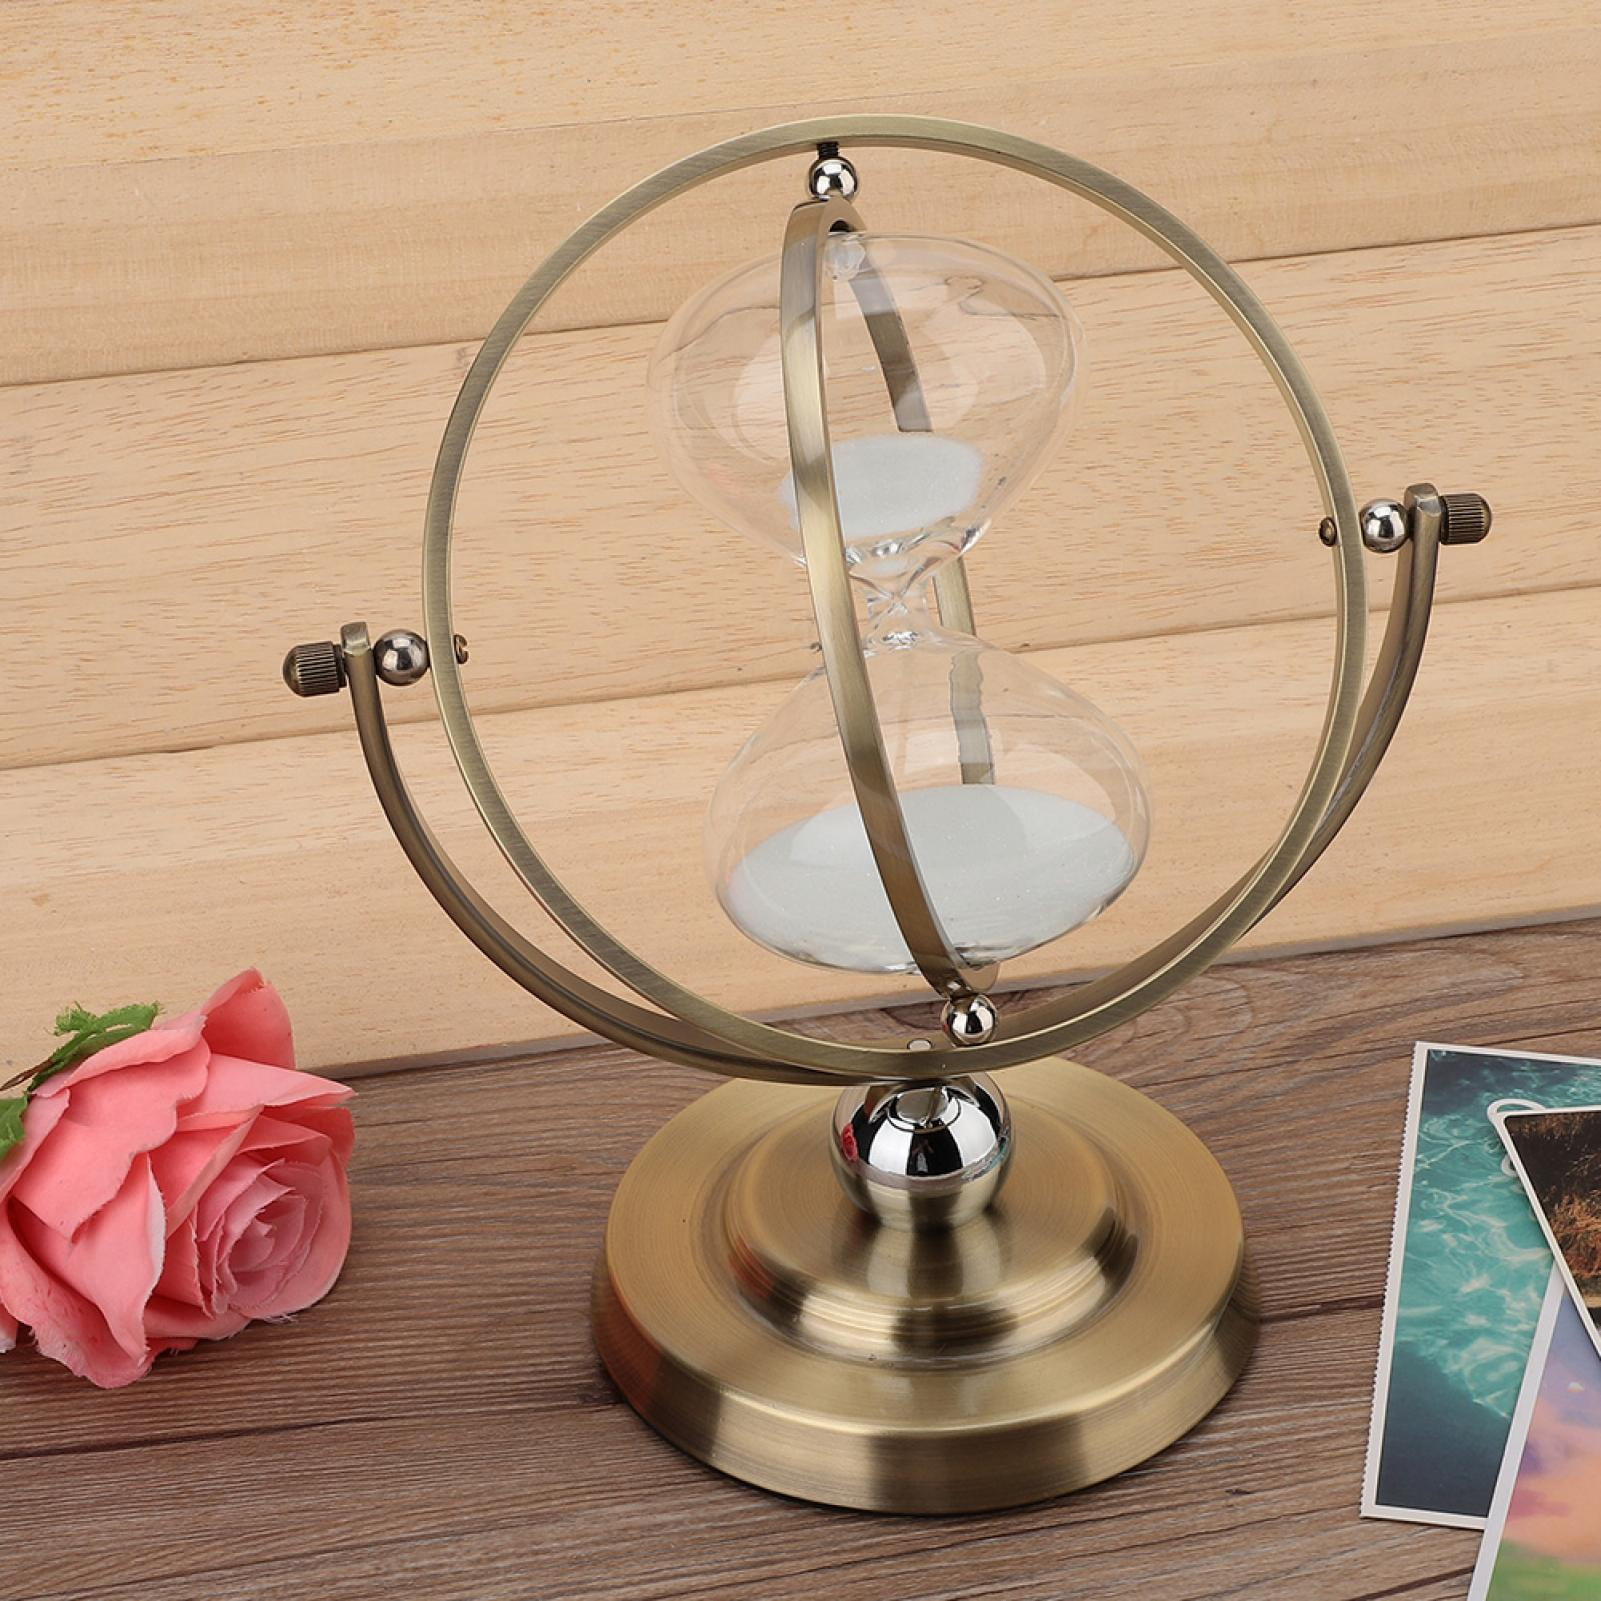 Cafopgrill 15 Minutes Metal Rotating Sand Glass Timer Clock Hourglass Table Ornament Home Decor Gift Sand Timer Decor 